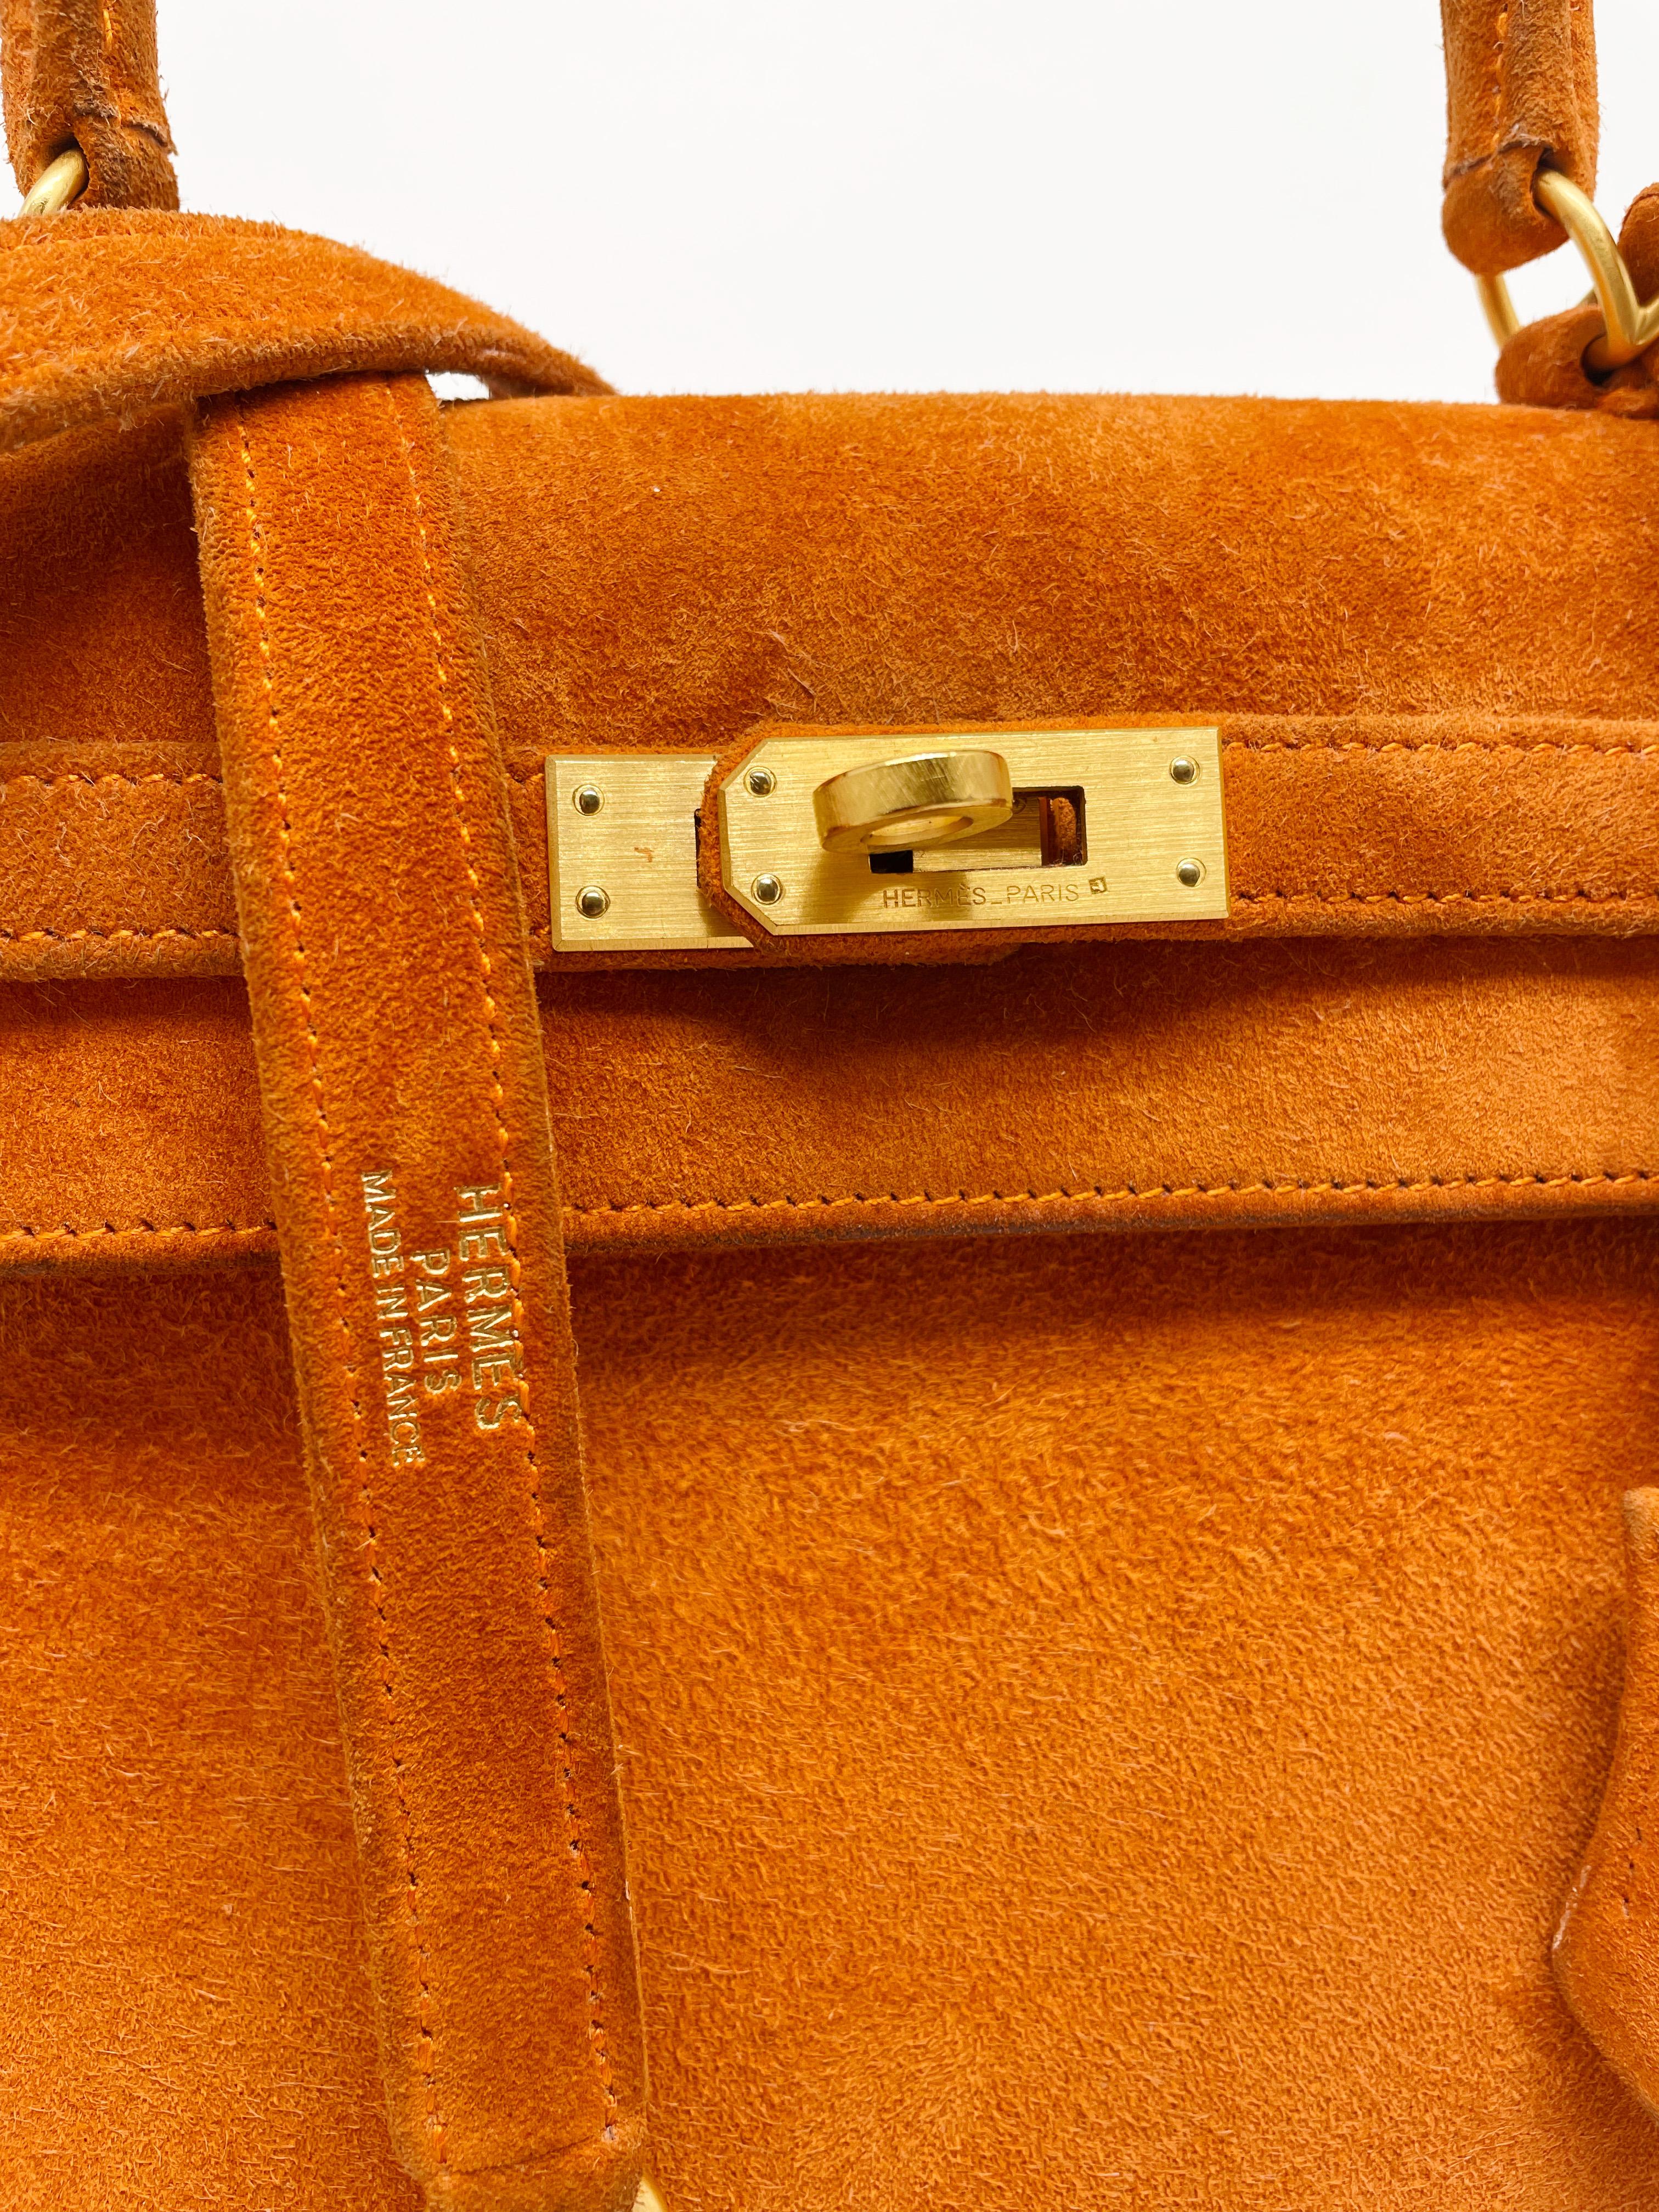 Exceptional Hermes Kelly 25 cm handbag in Doblis calfskin and refined brushed gold hardware, simple handle in orange suede, a simple removable handle in orange suede leather allowing it to be worn in the hand or on the shoulder.

Flap